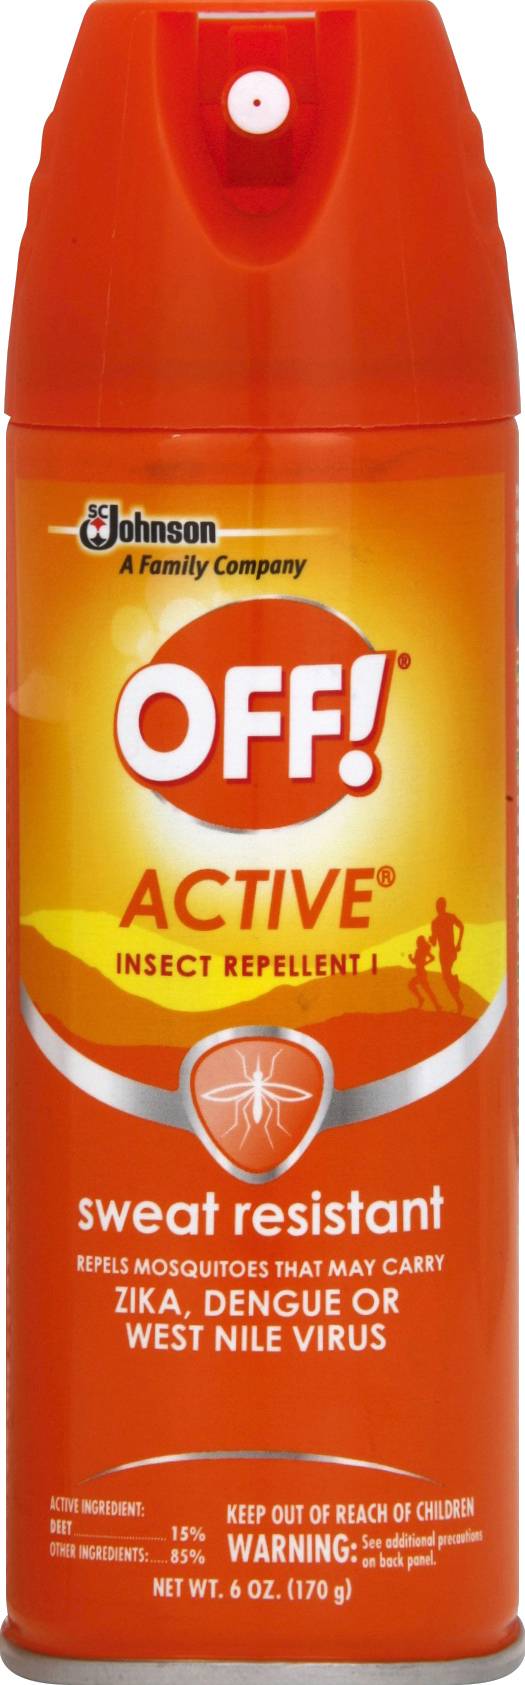 Off Active Insect Repellent & Sweat Resistant